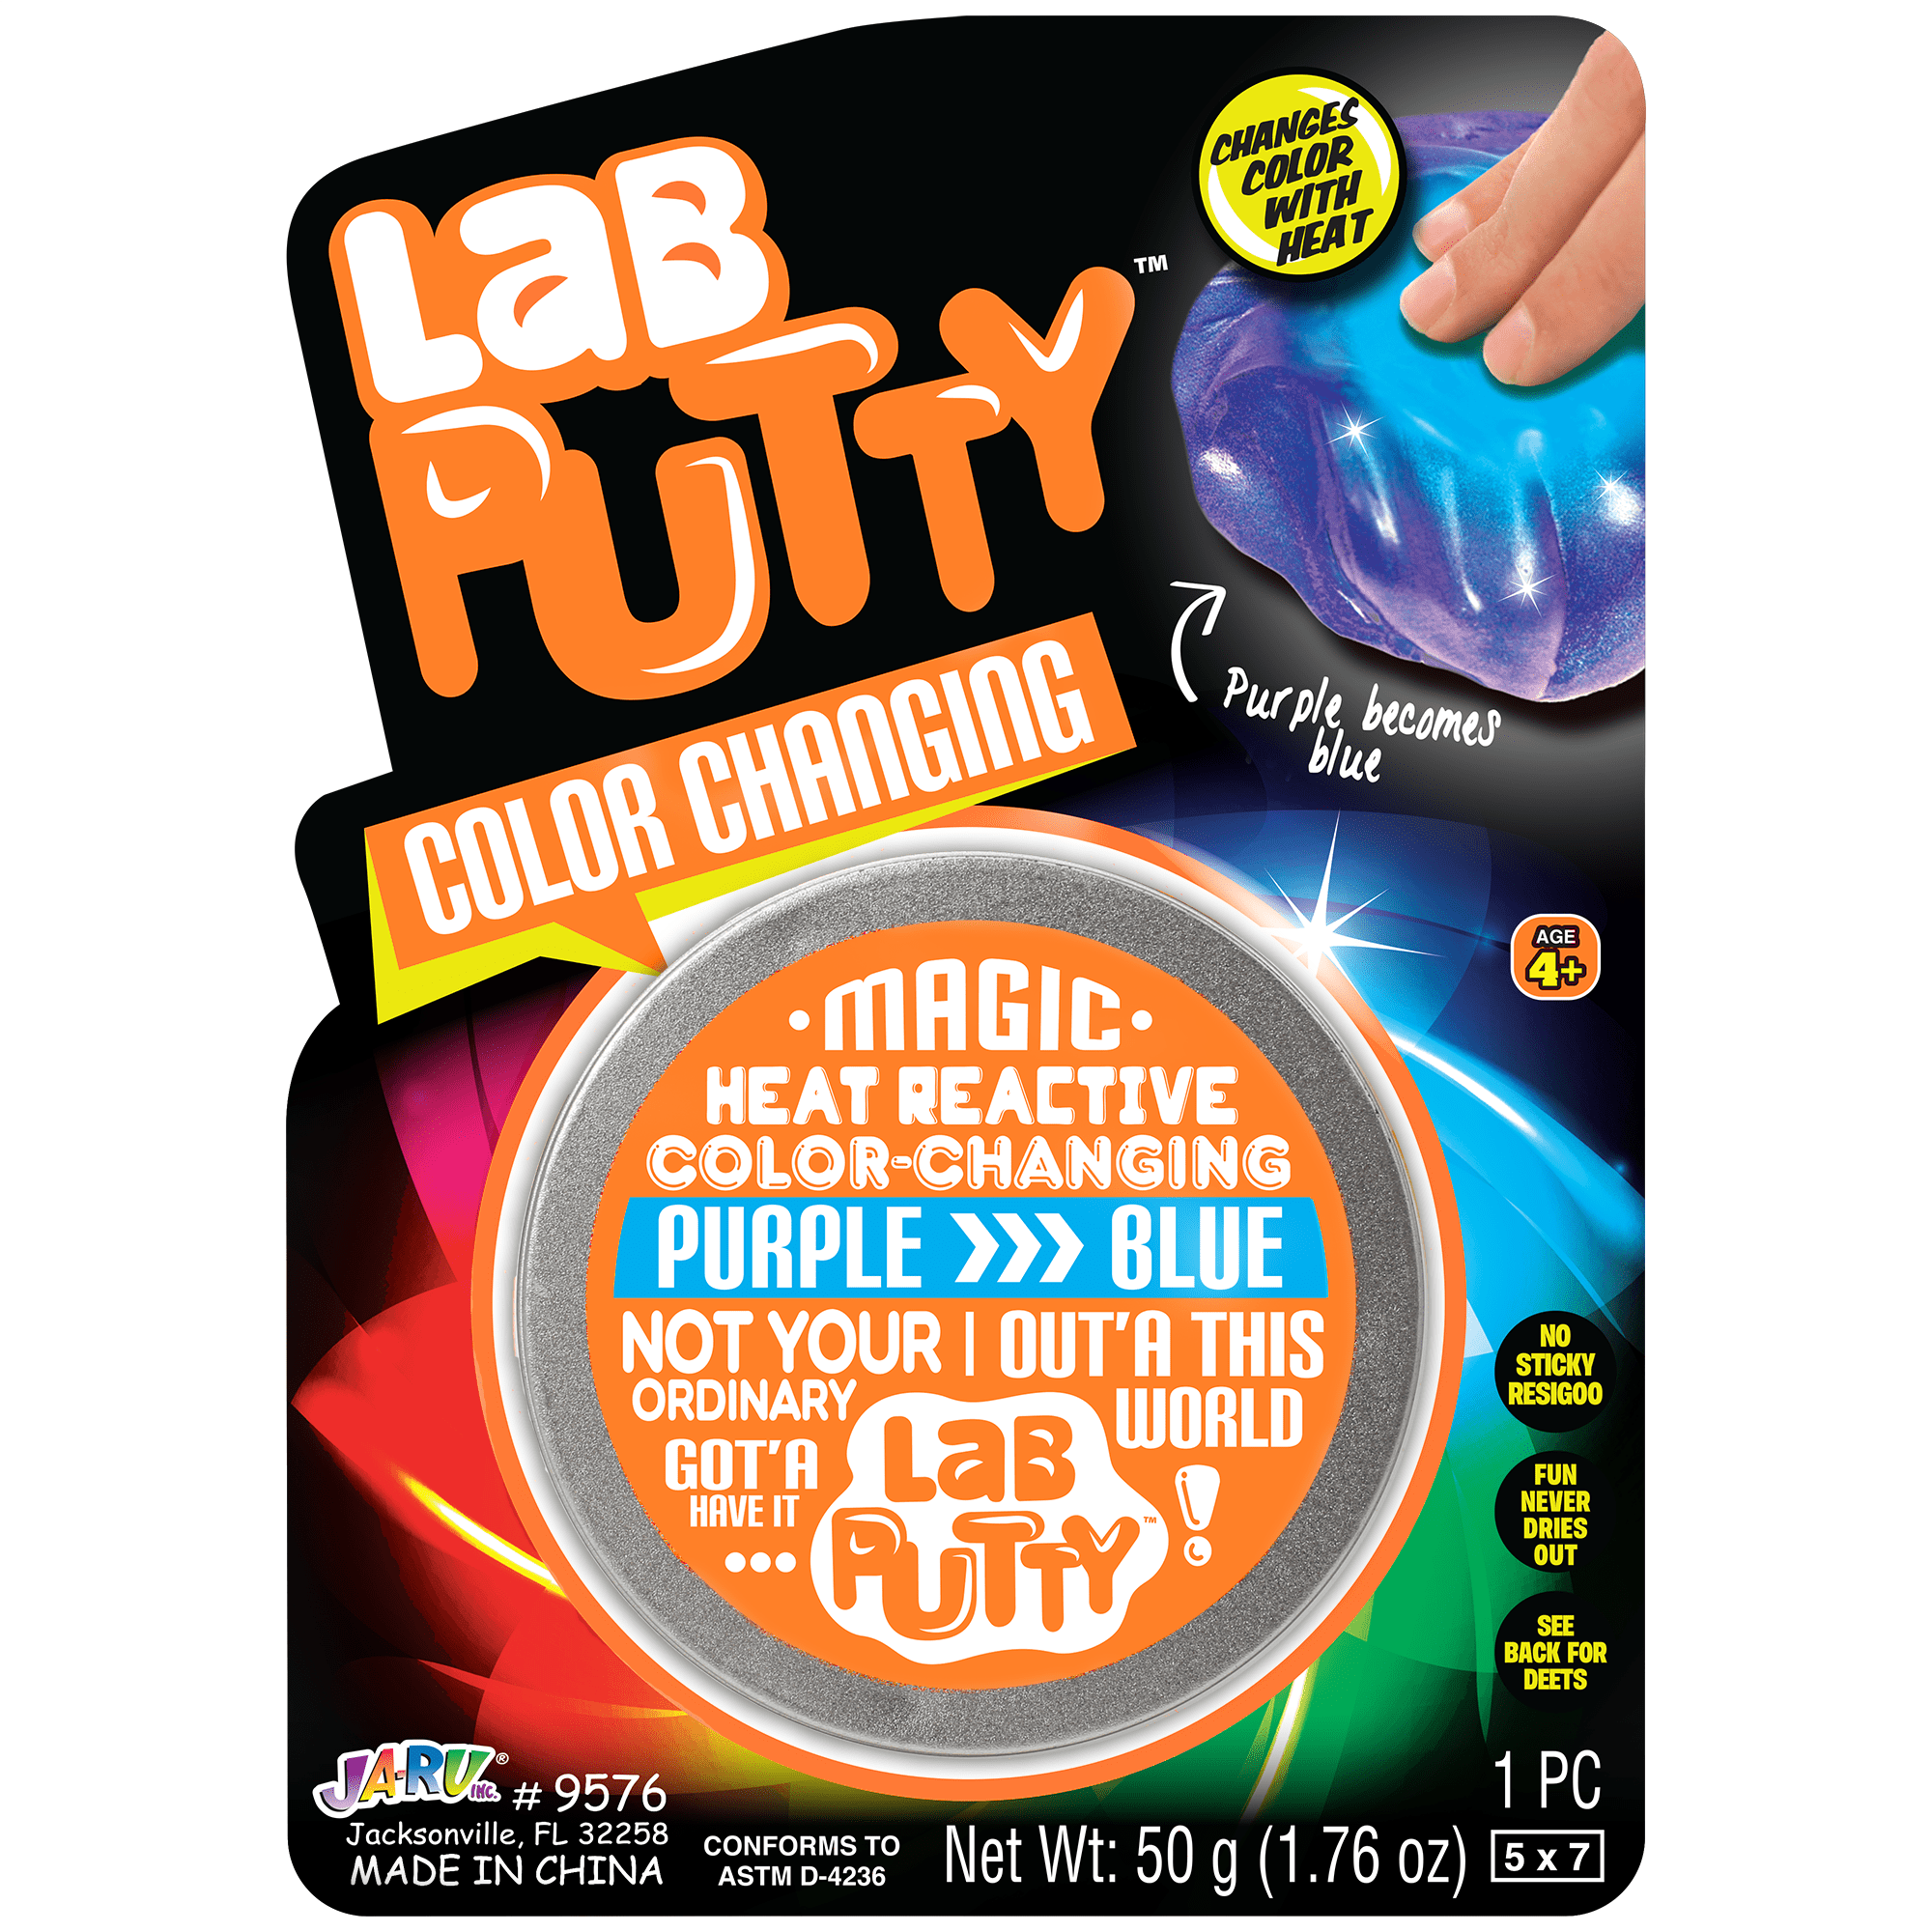 NEW! PLANET PUTTY Metallic Play Putty 9 Fun Colors PICK YOUR COLOR 